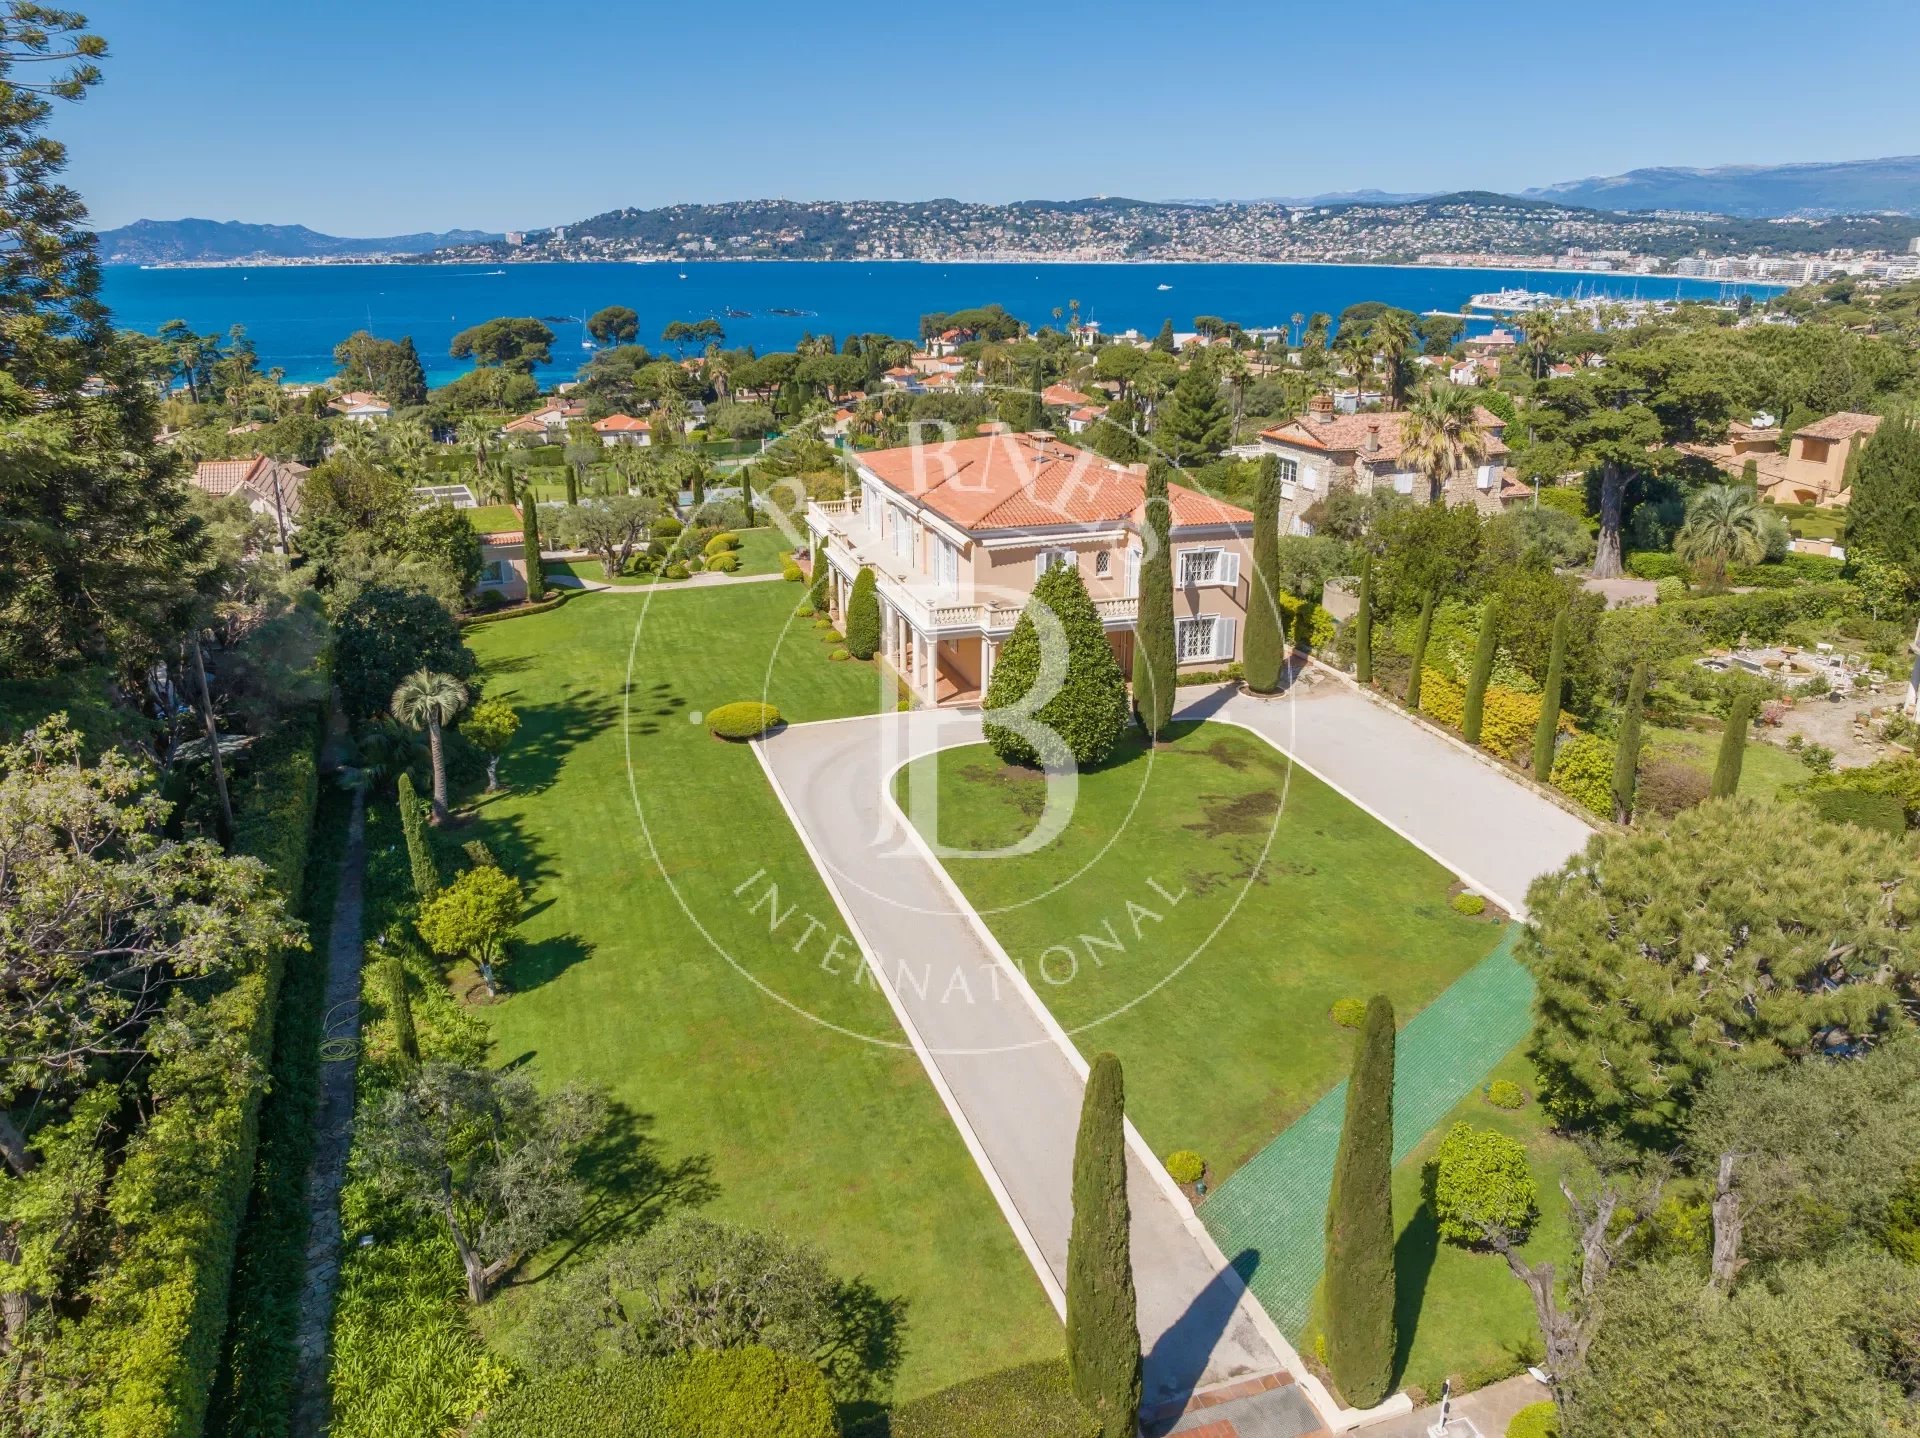 Villa Antibes - picture 2 title=